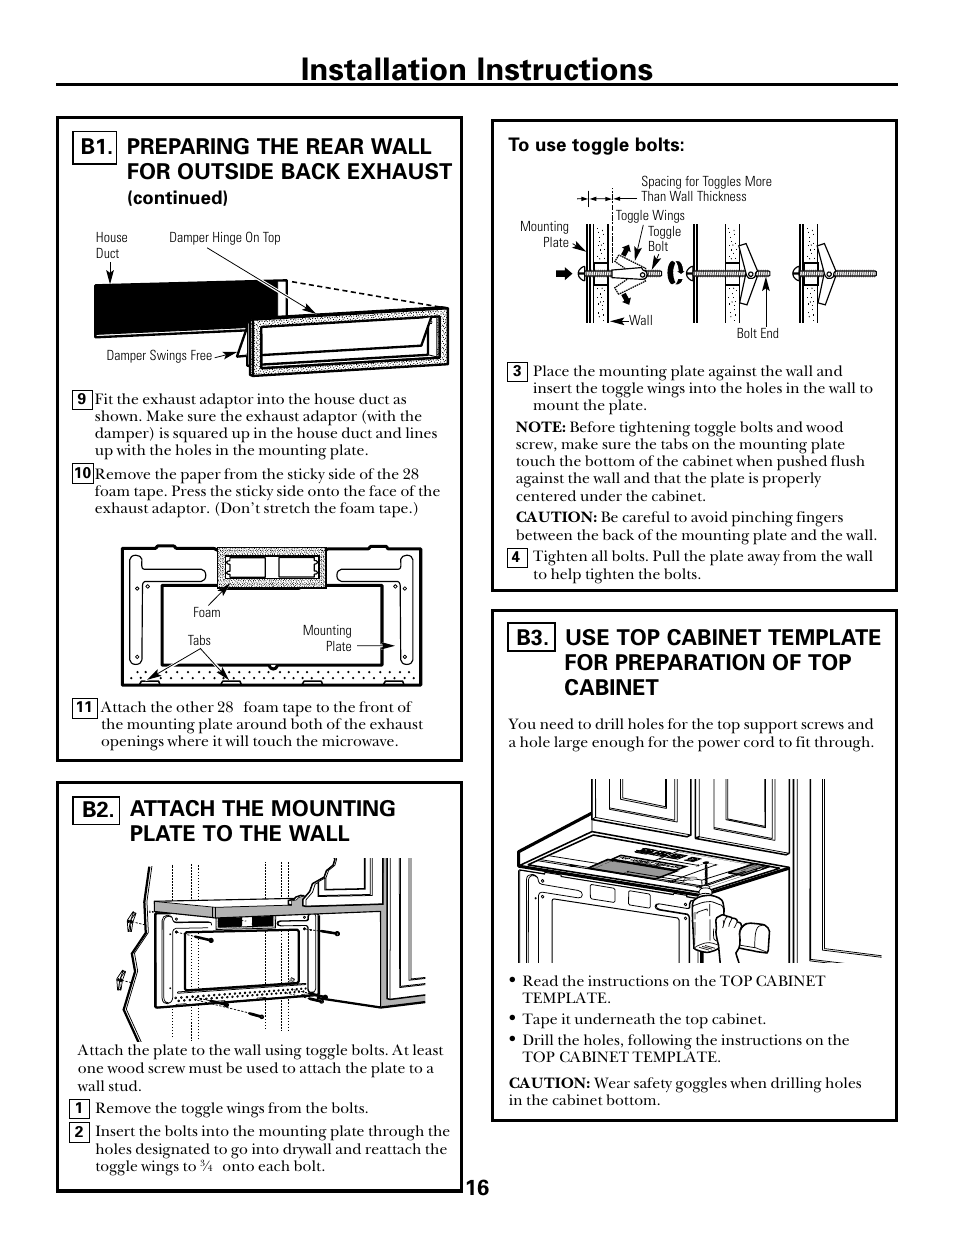 Attach mounting plate to wall, Preparation of top cabinet, Installation instructions | Attach the mounting plate to the wall b2. 16 | GE spacemaker xl1800 User Manual | Page 16 / 24